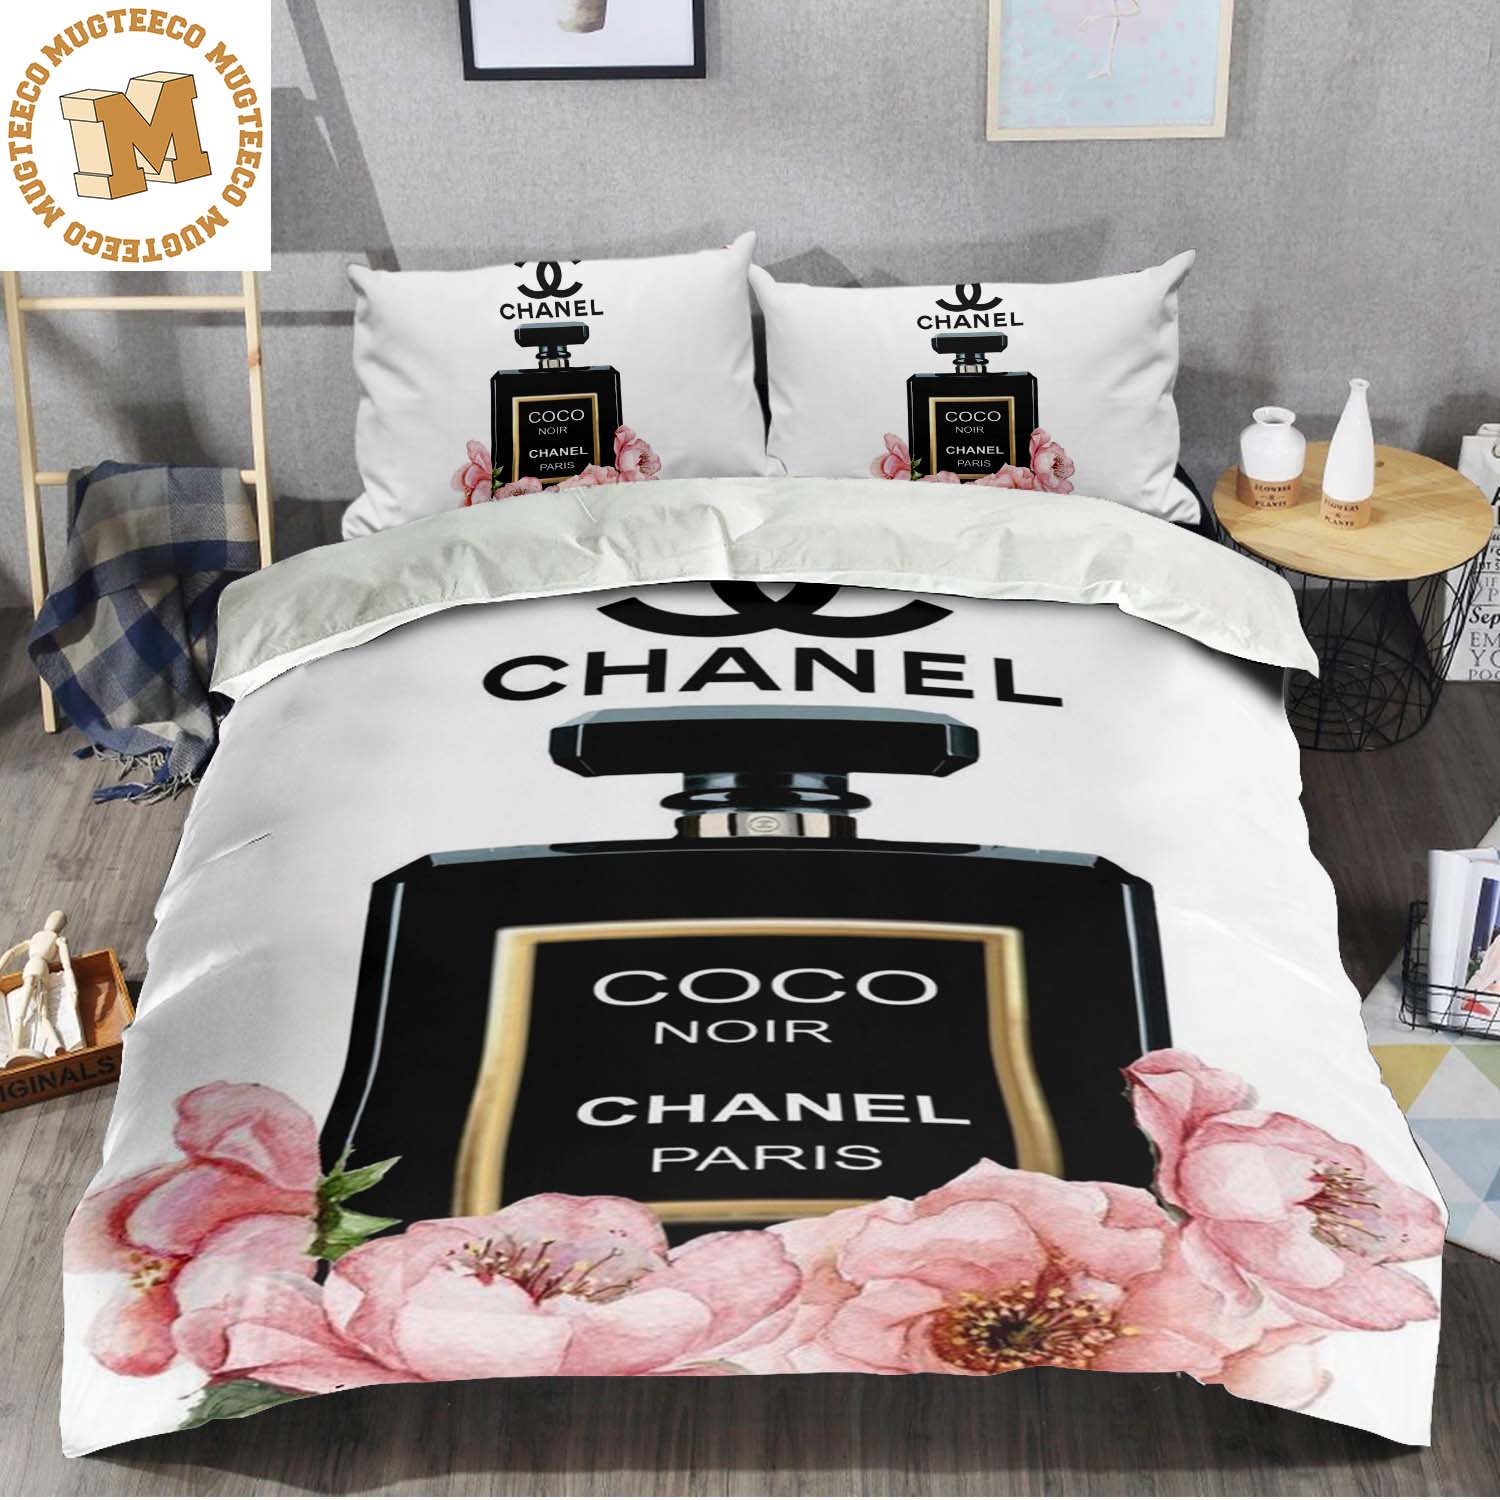 Chanel Coco Noir Paris Black Perfume With Pink Flowers In White